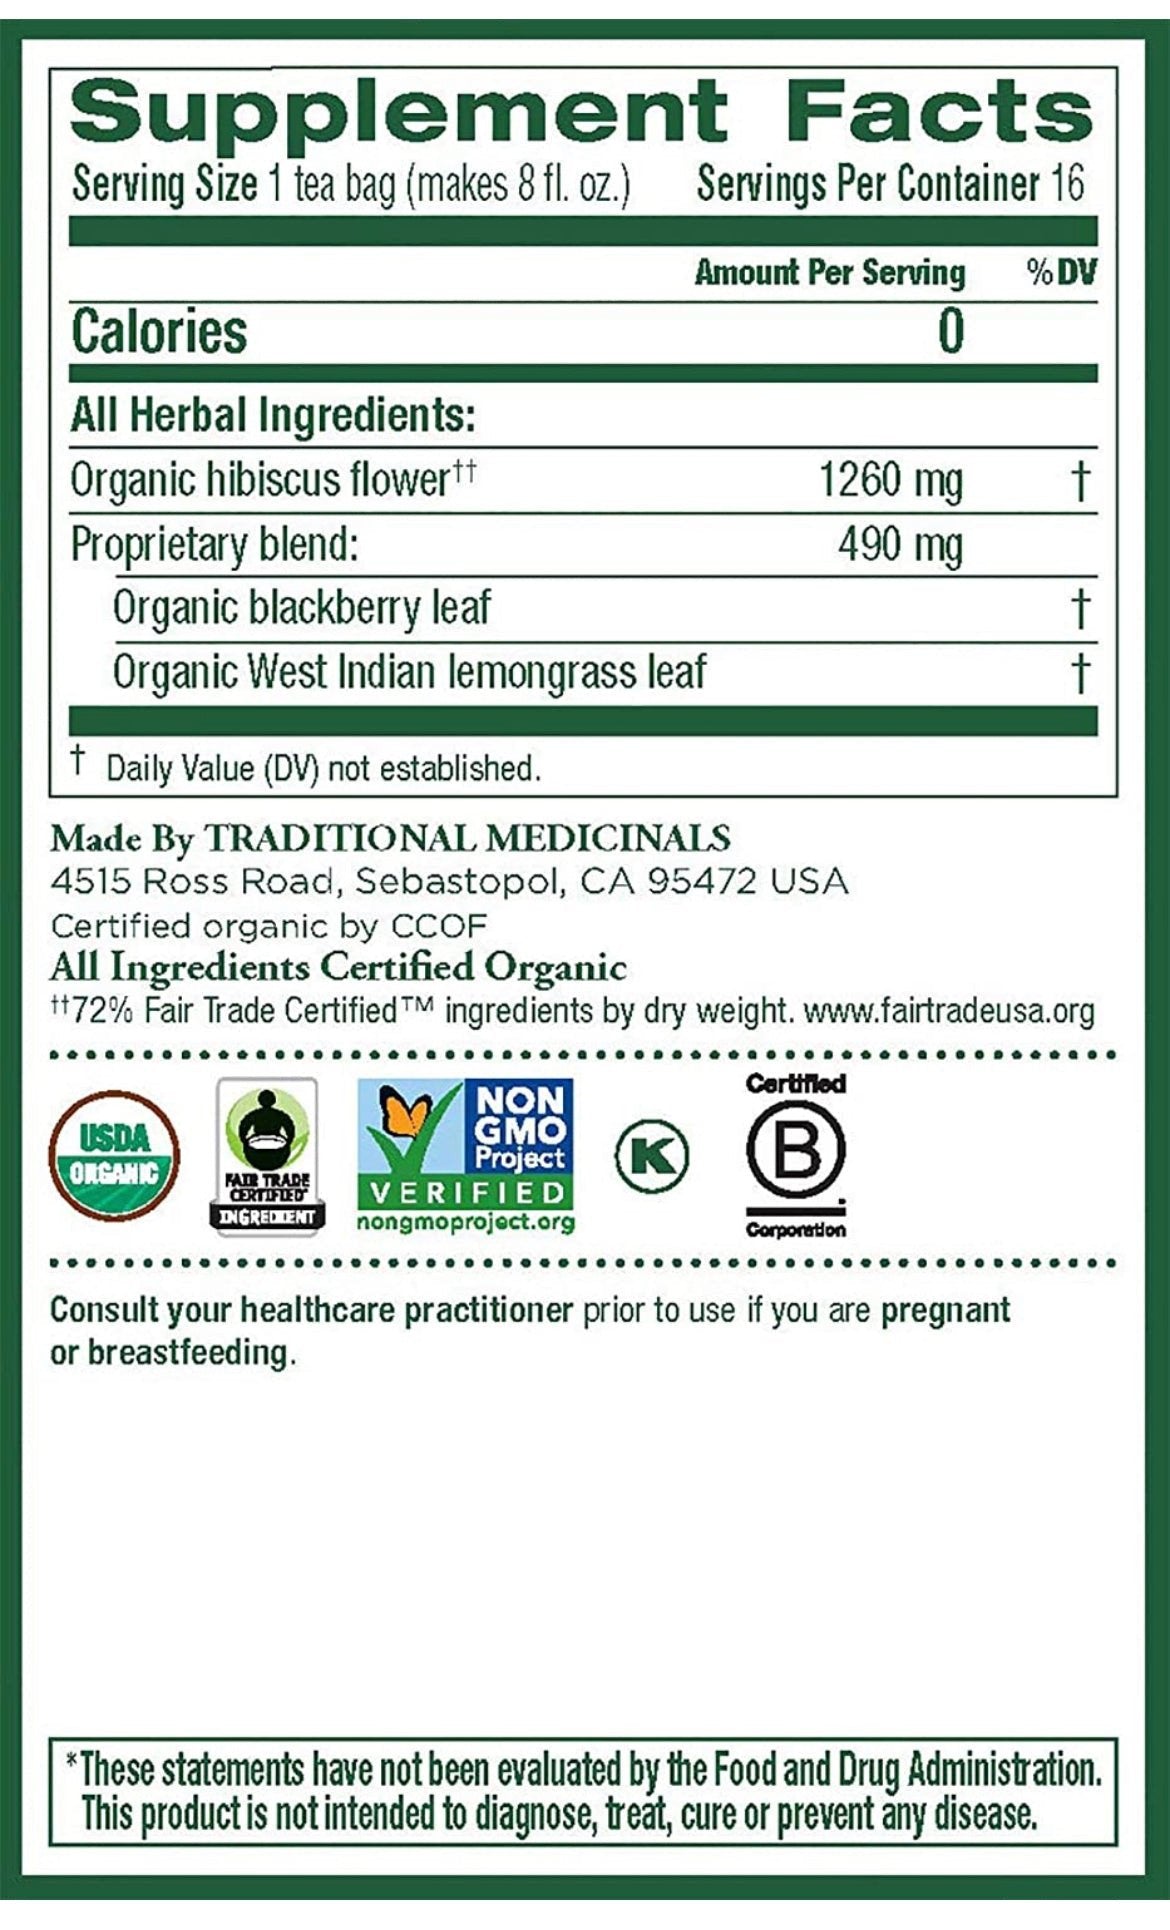 Traditional Medicinals Organic Hibiscus Herbal Tea, Supports Heart Health.